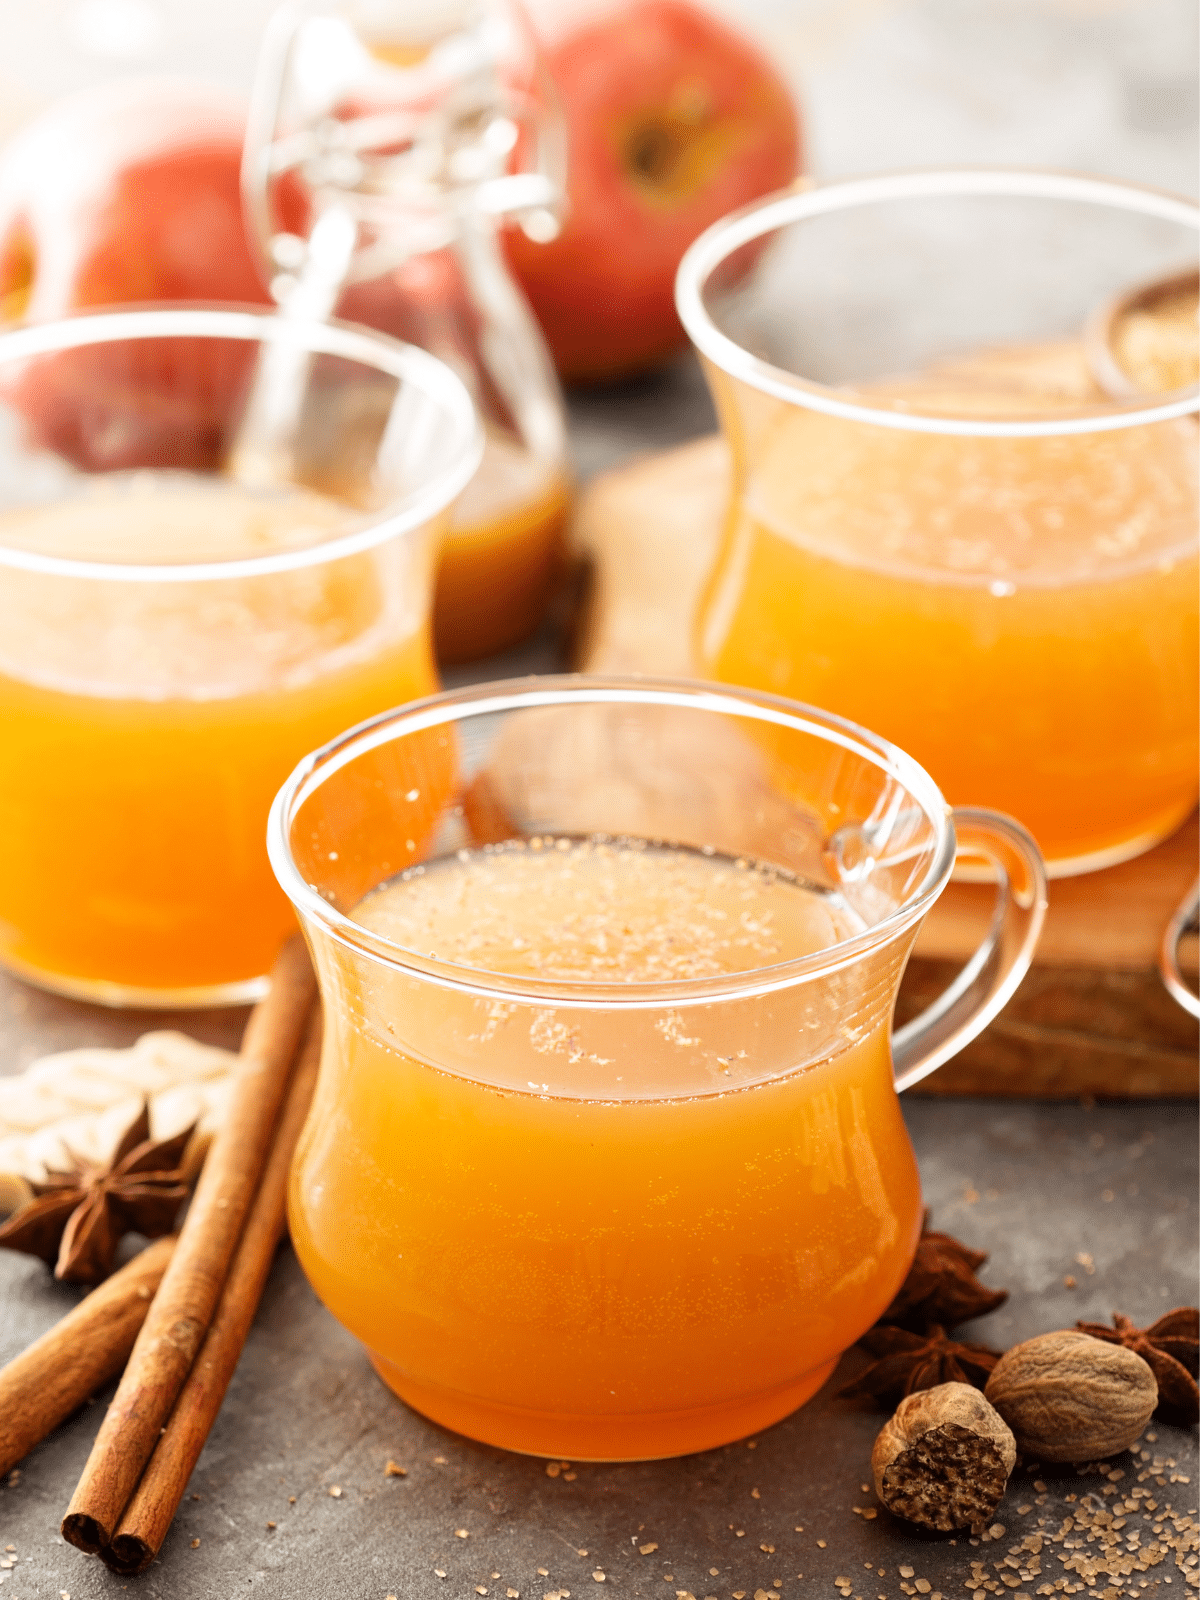 Three cups of apple cider, cinnamon, star anise and apples on the side.